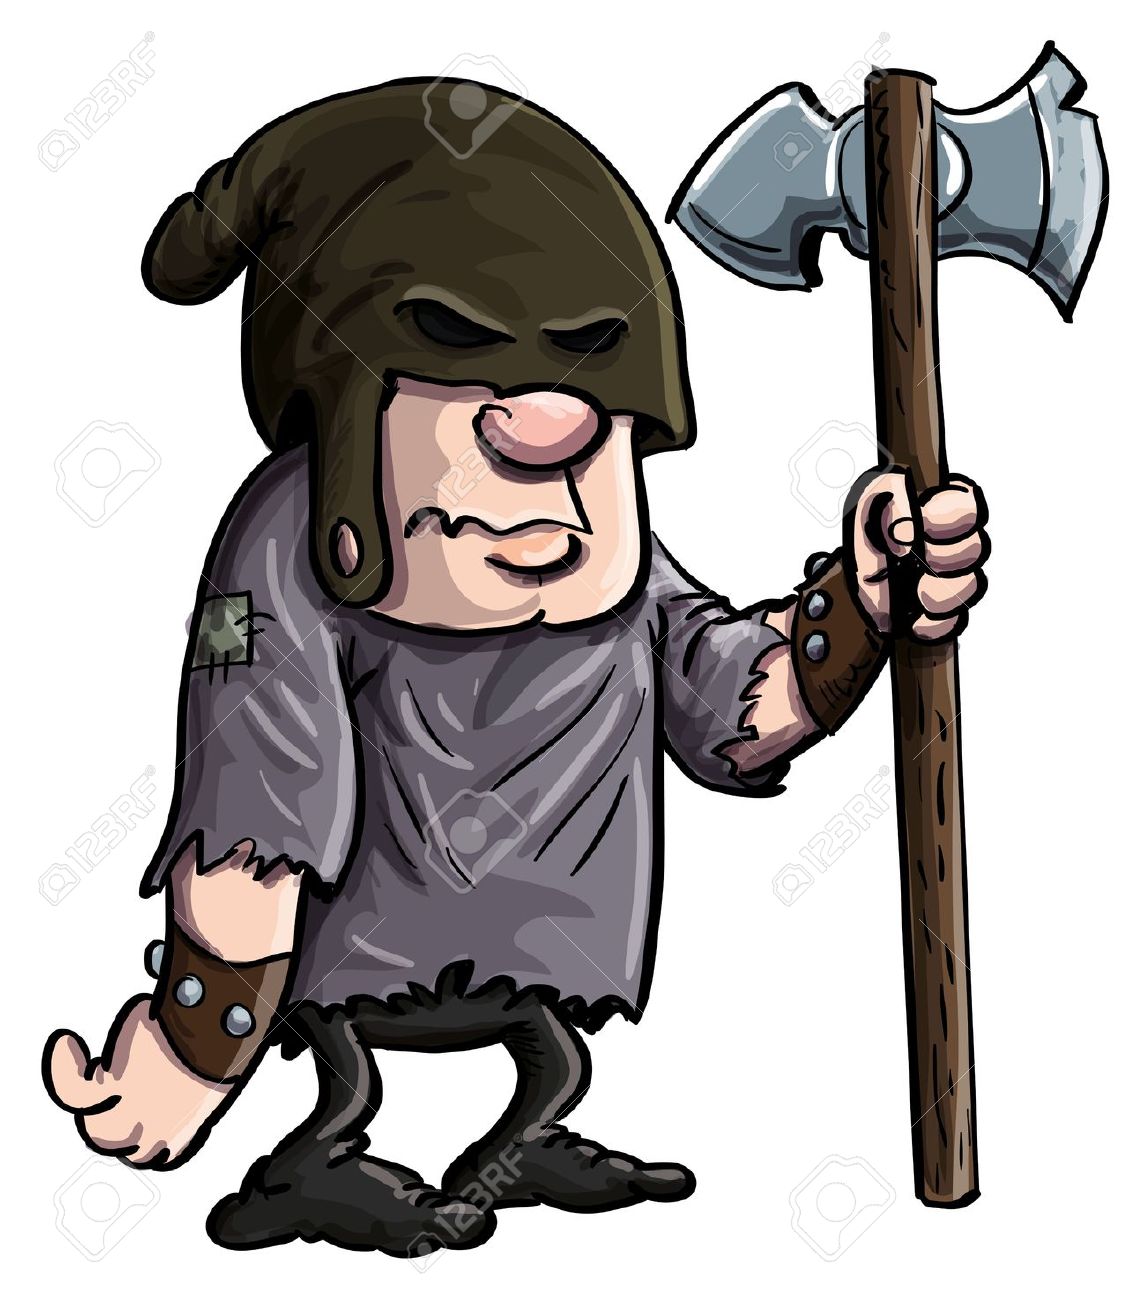 322 Executioner Stock Vector Illustration And Royalty Free.